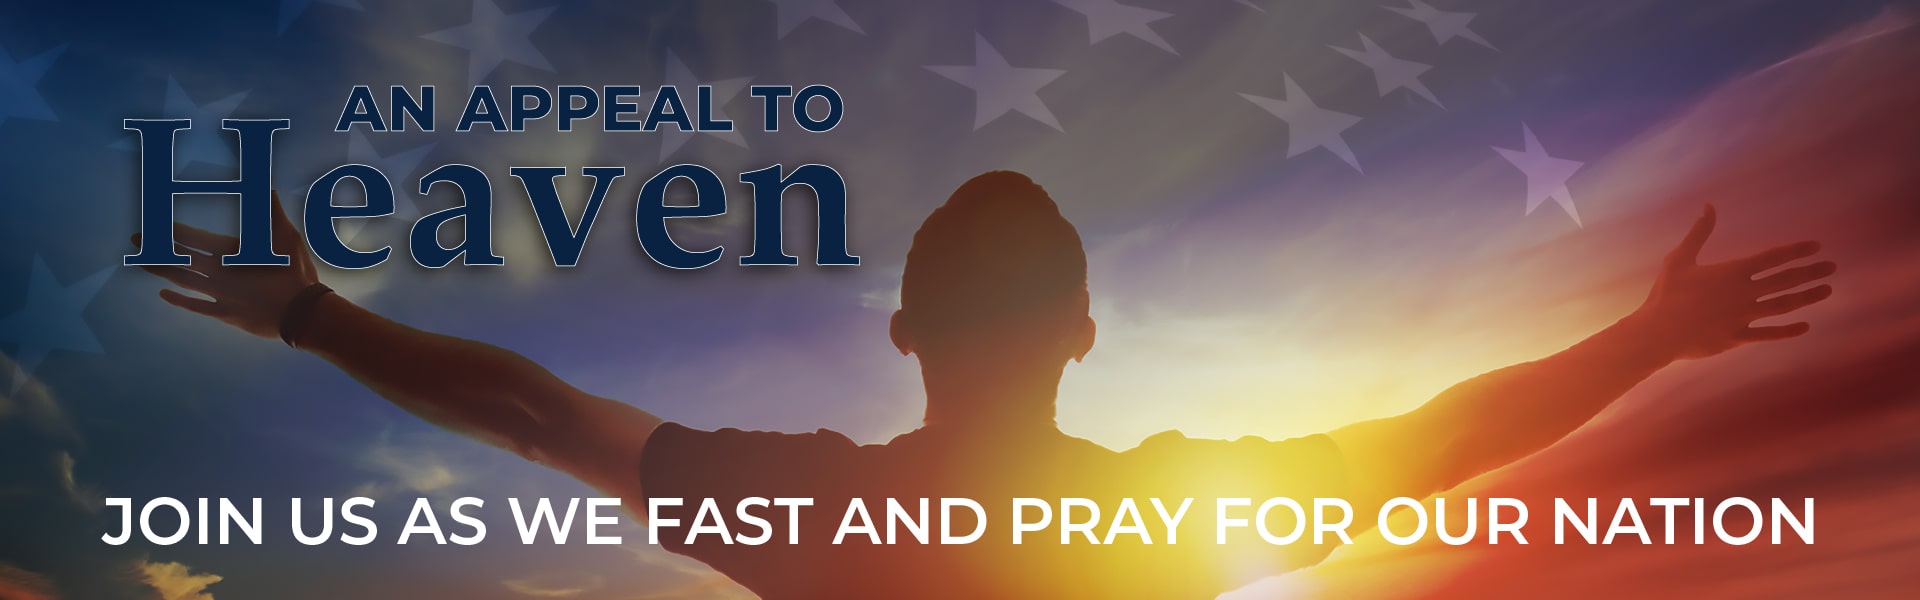 Appeal to Heaven 2022 Join Us as We Fast and Pray for Our Nation